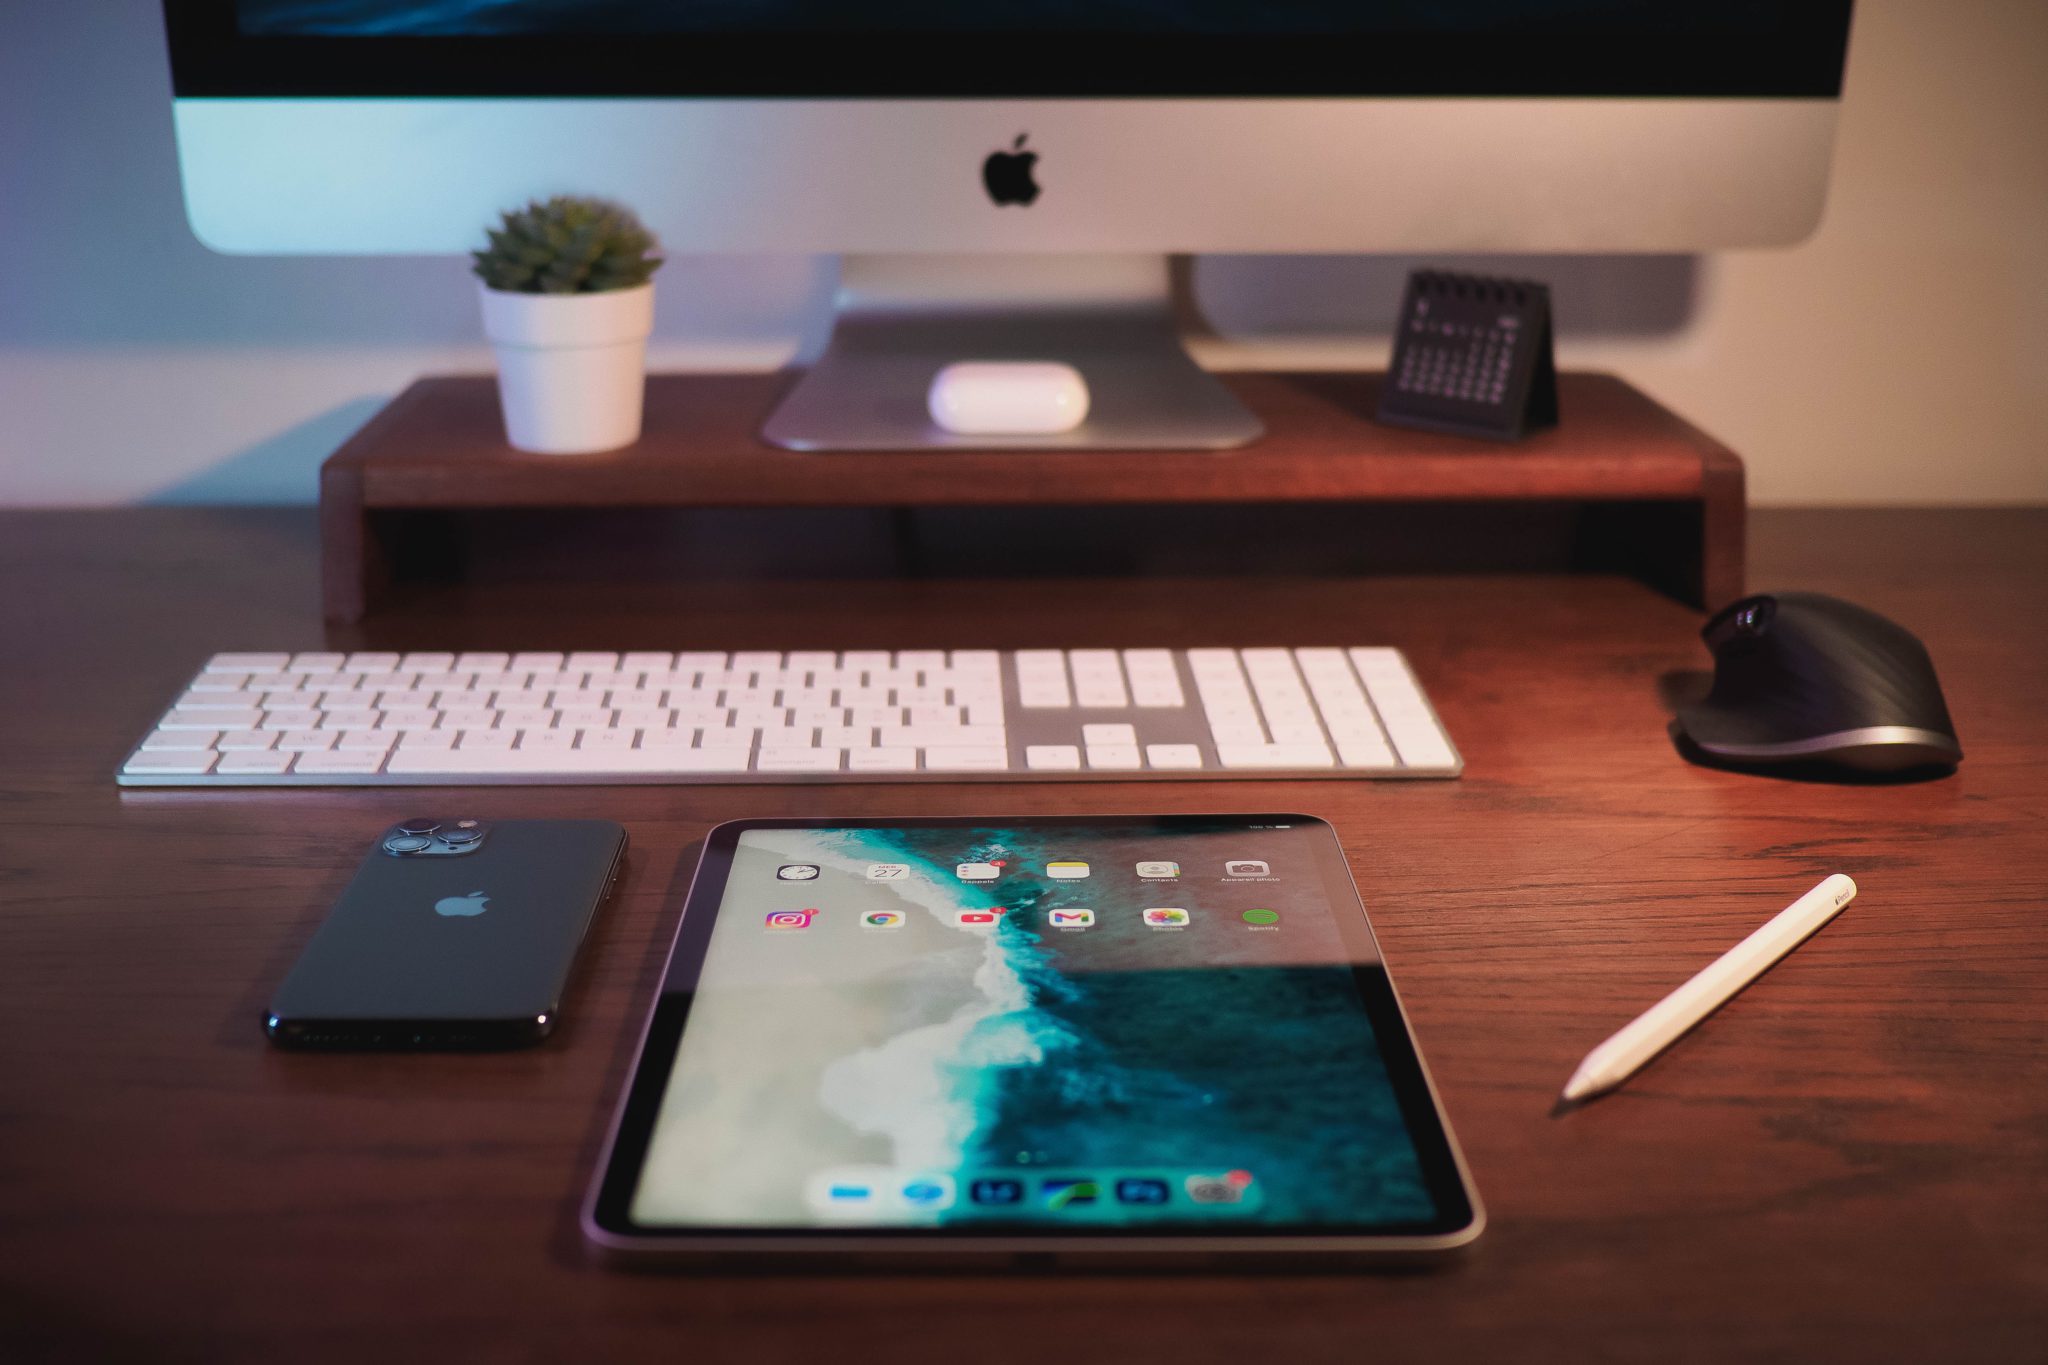 Apple devices on a wooden desk